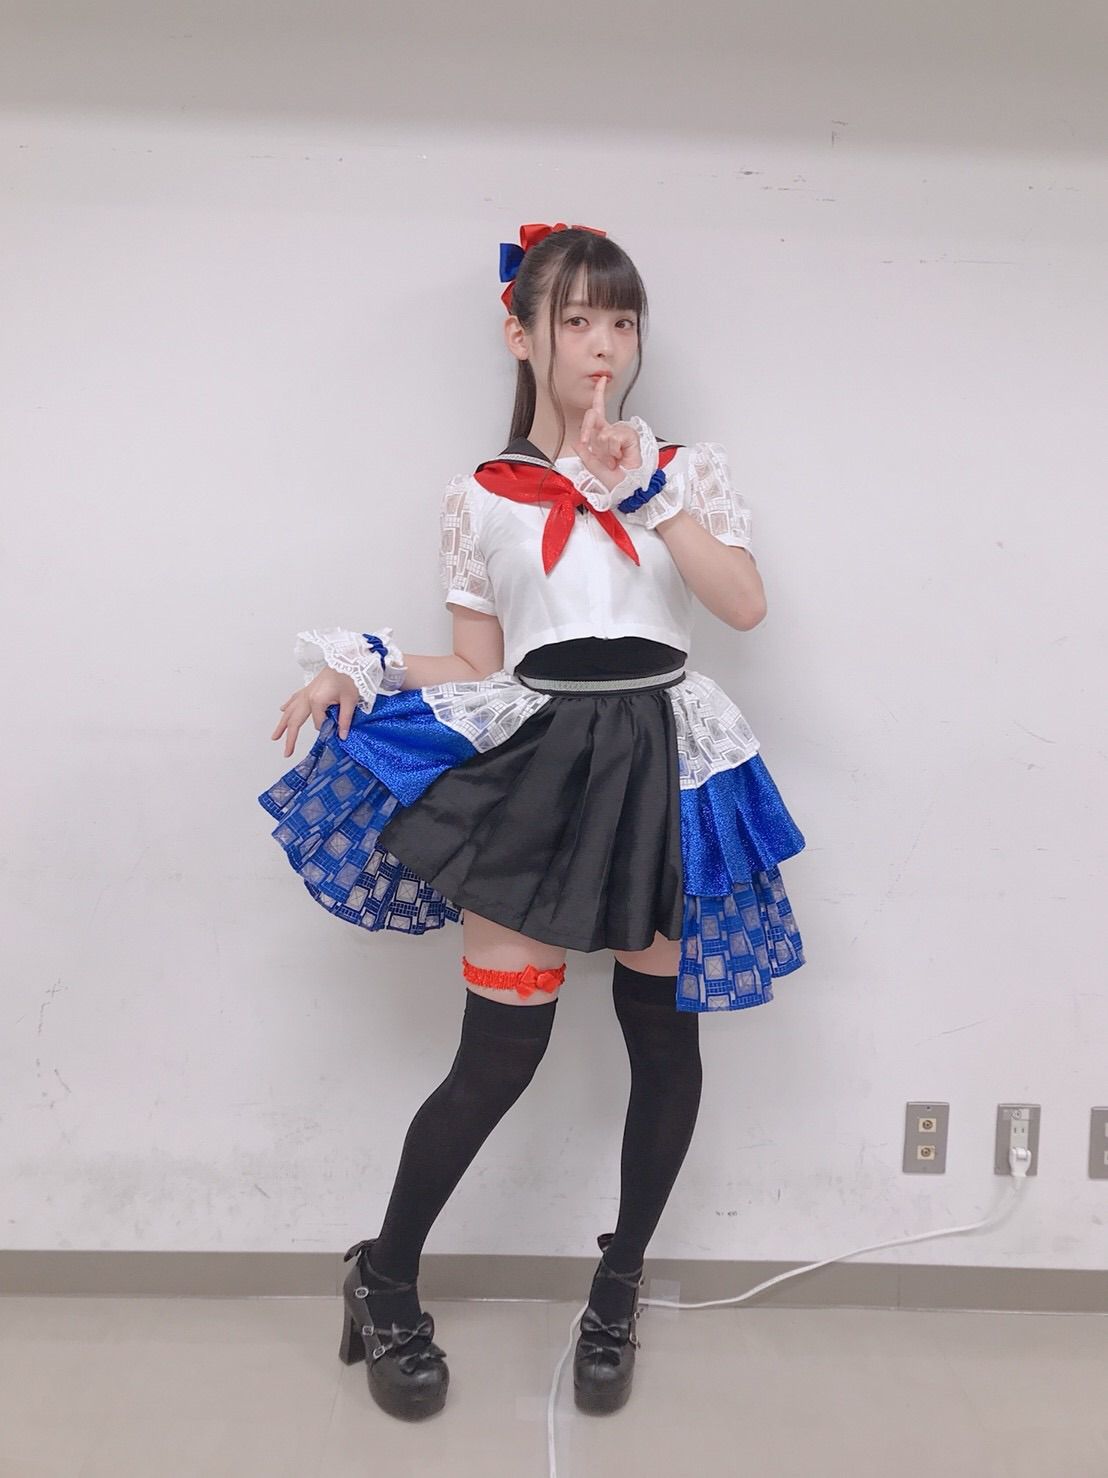 Sumire Uesaka "to emphasize the thigh... W] also erotic image offer Wwwwwww 12